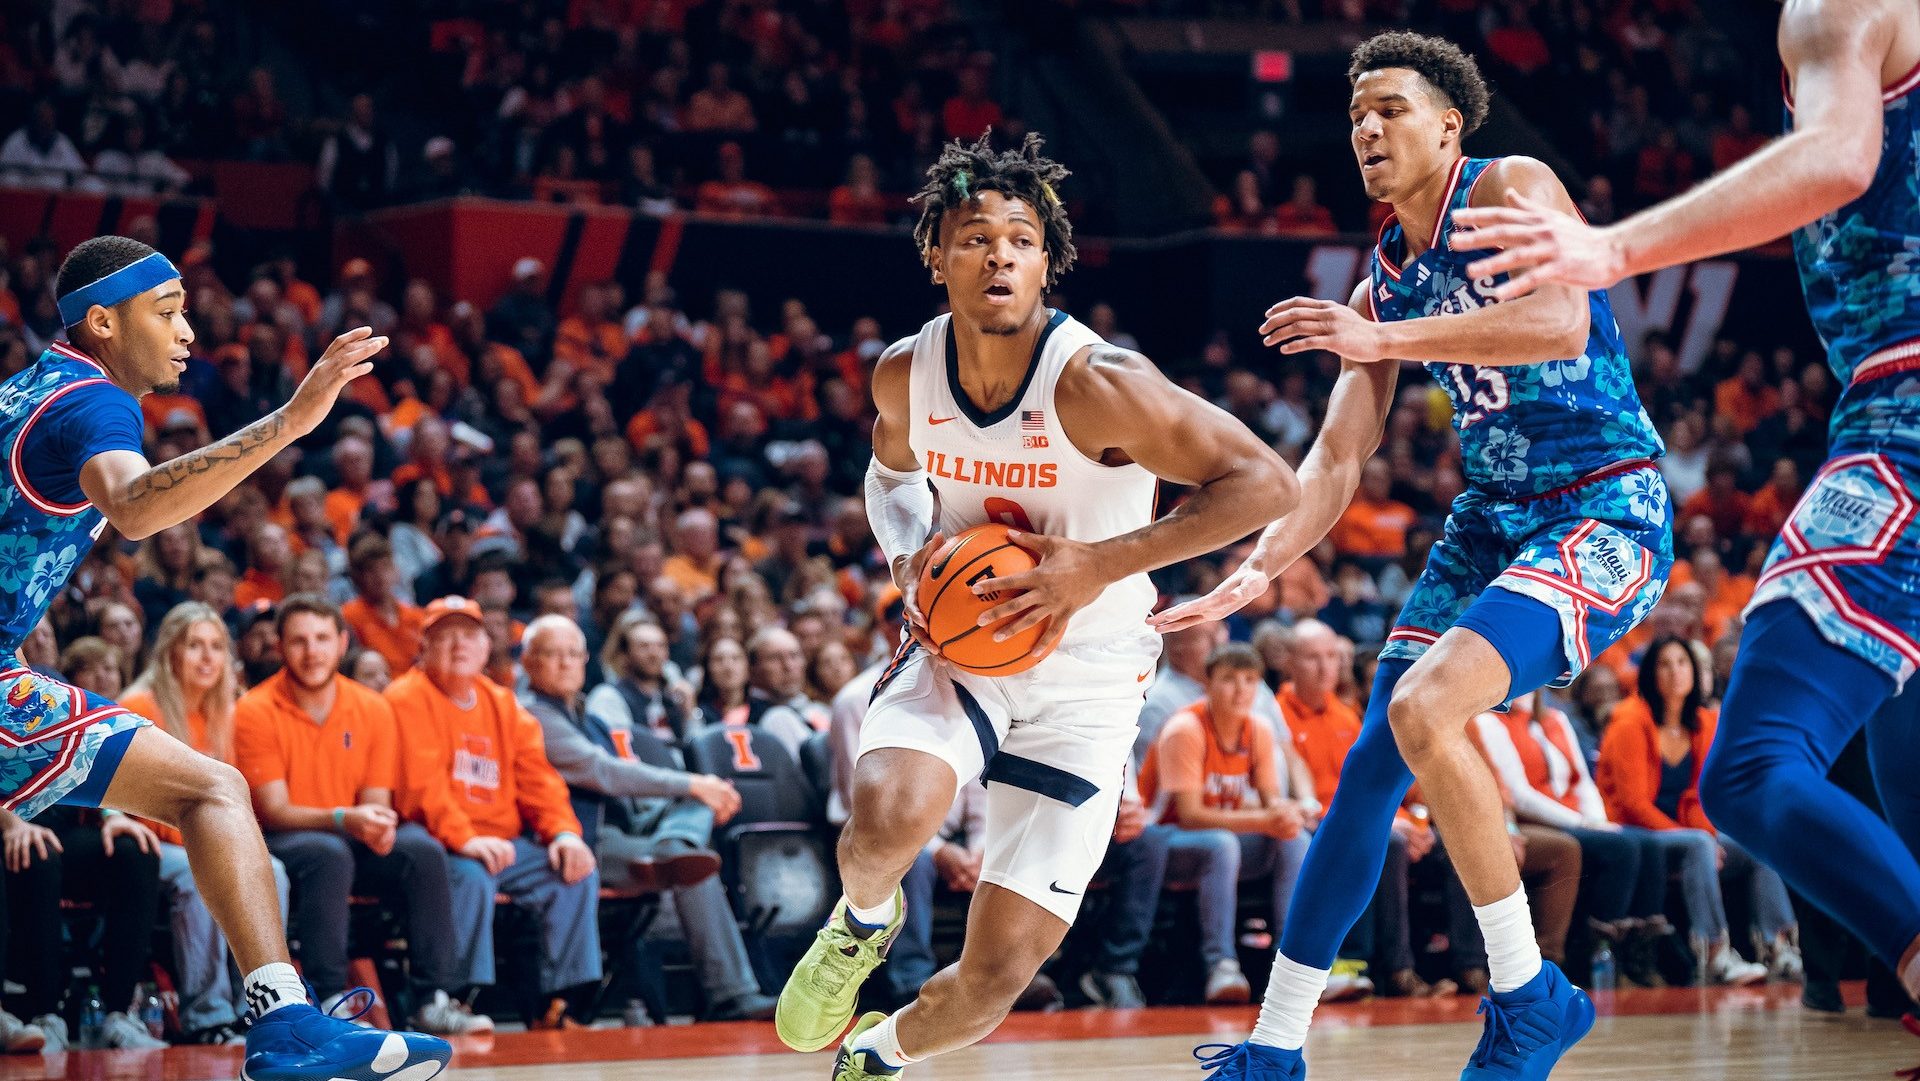 ‘Been there, done that” - Get Ready for Illini’s Old Crunch Time Lineup - A Brad Underwood Dream